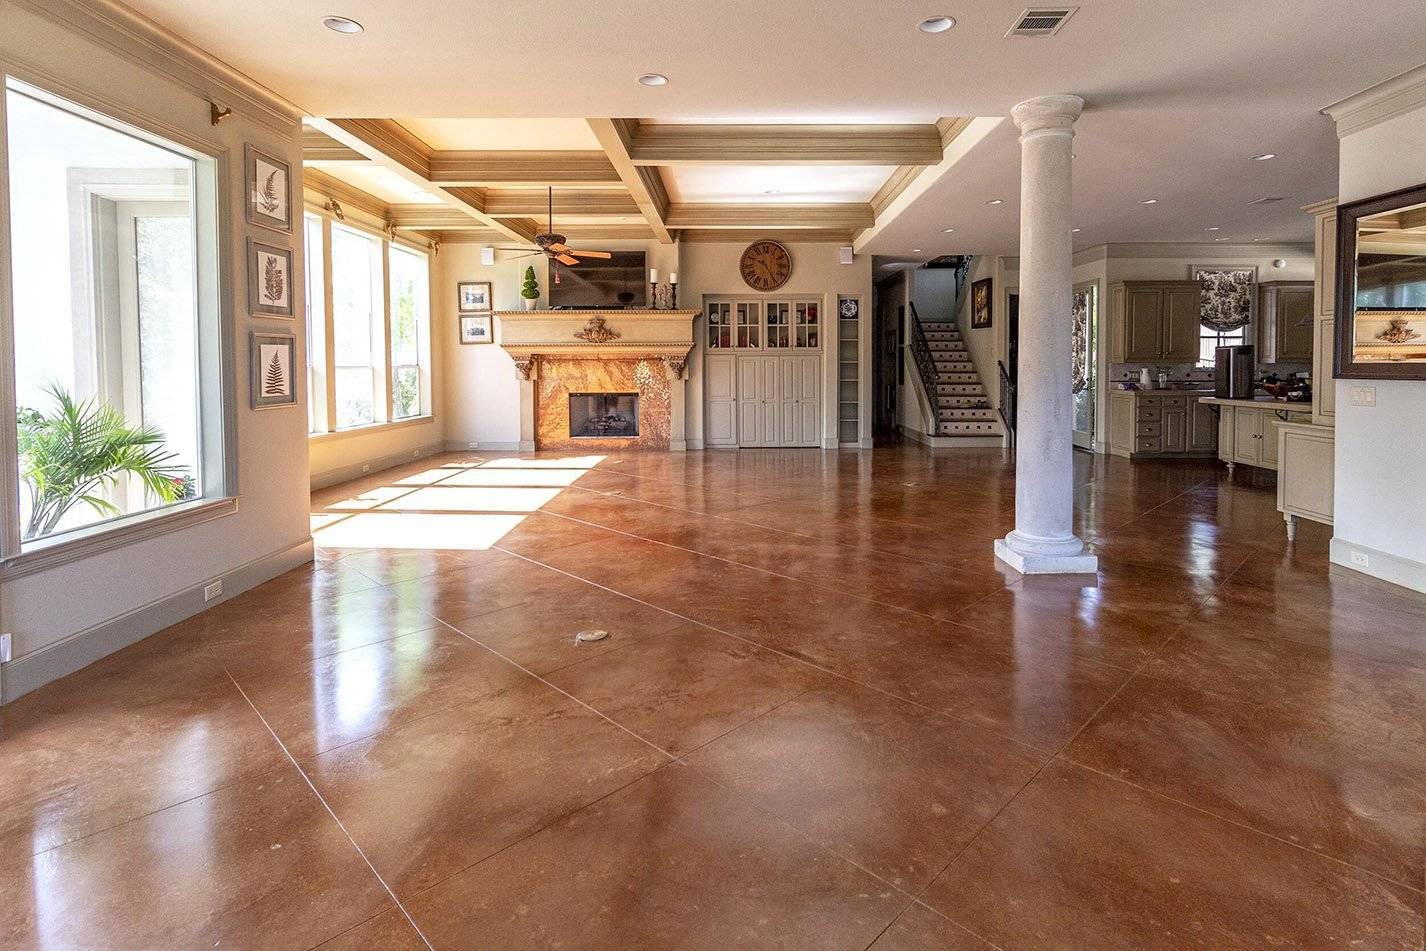 An acid stained concrete living room floor